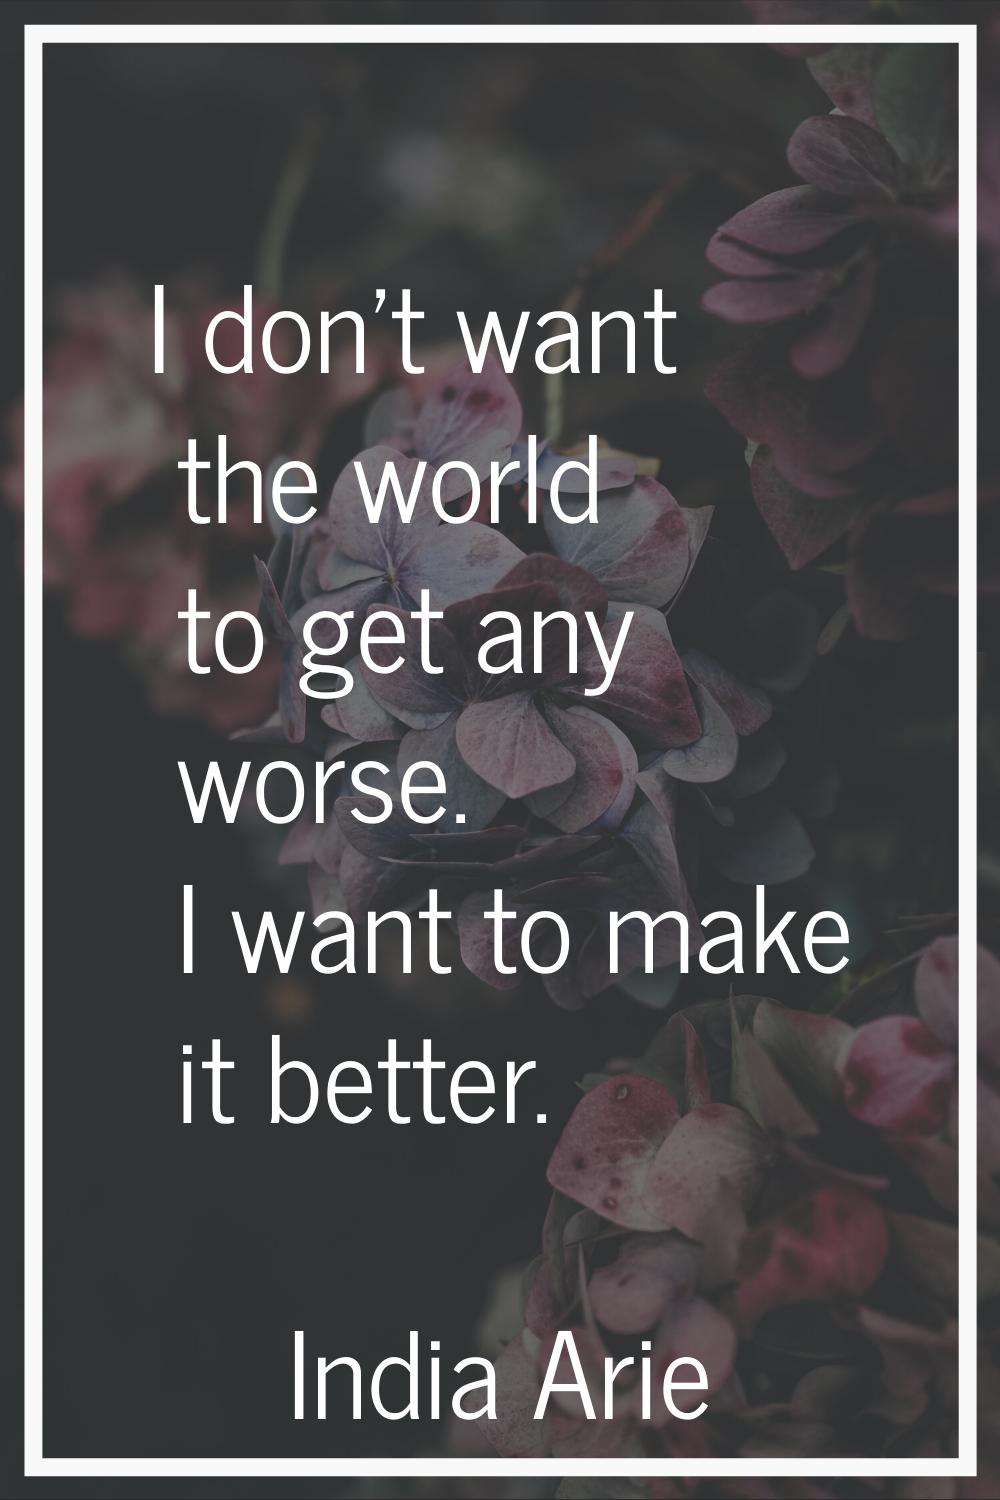 I don't want the world to get any worse. I want to make it better.